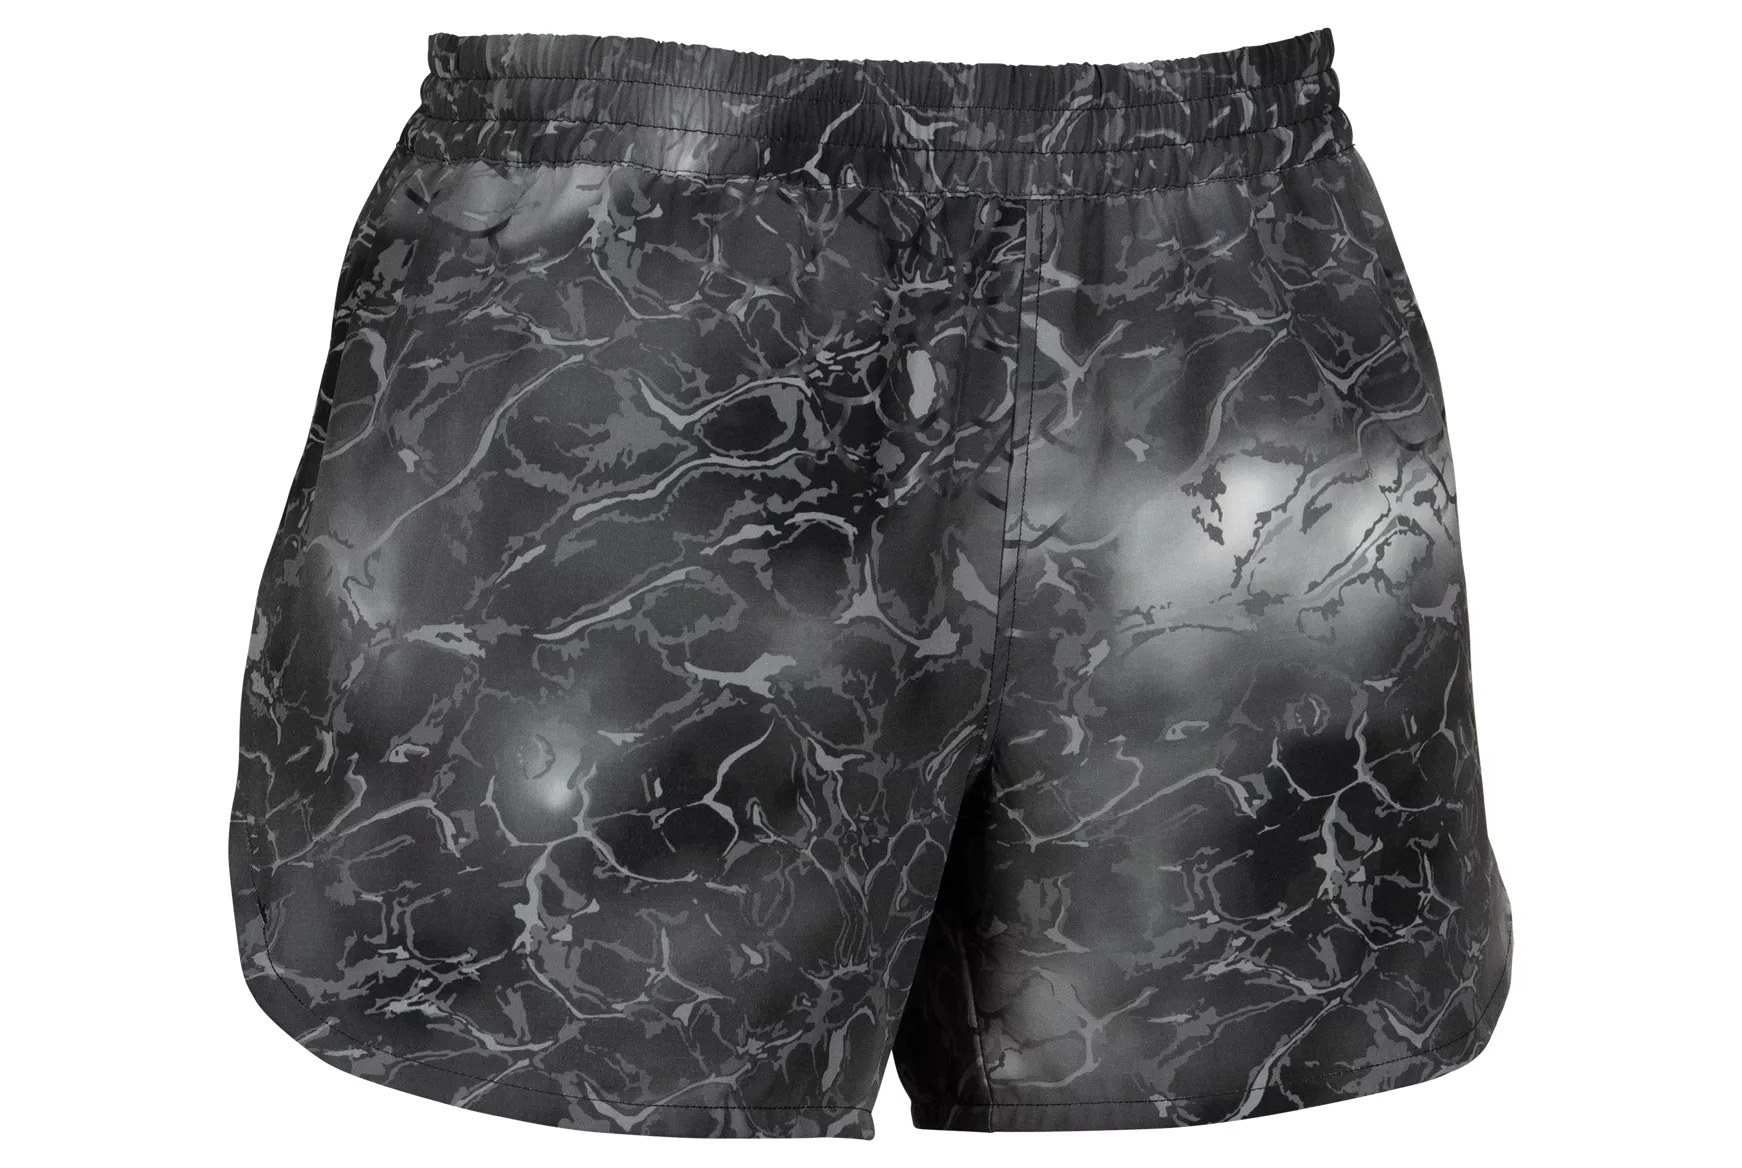 The shorts in a black and white watercolor pattern